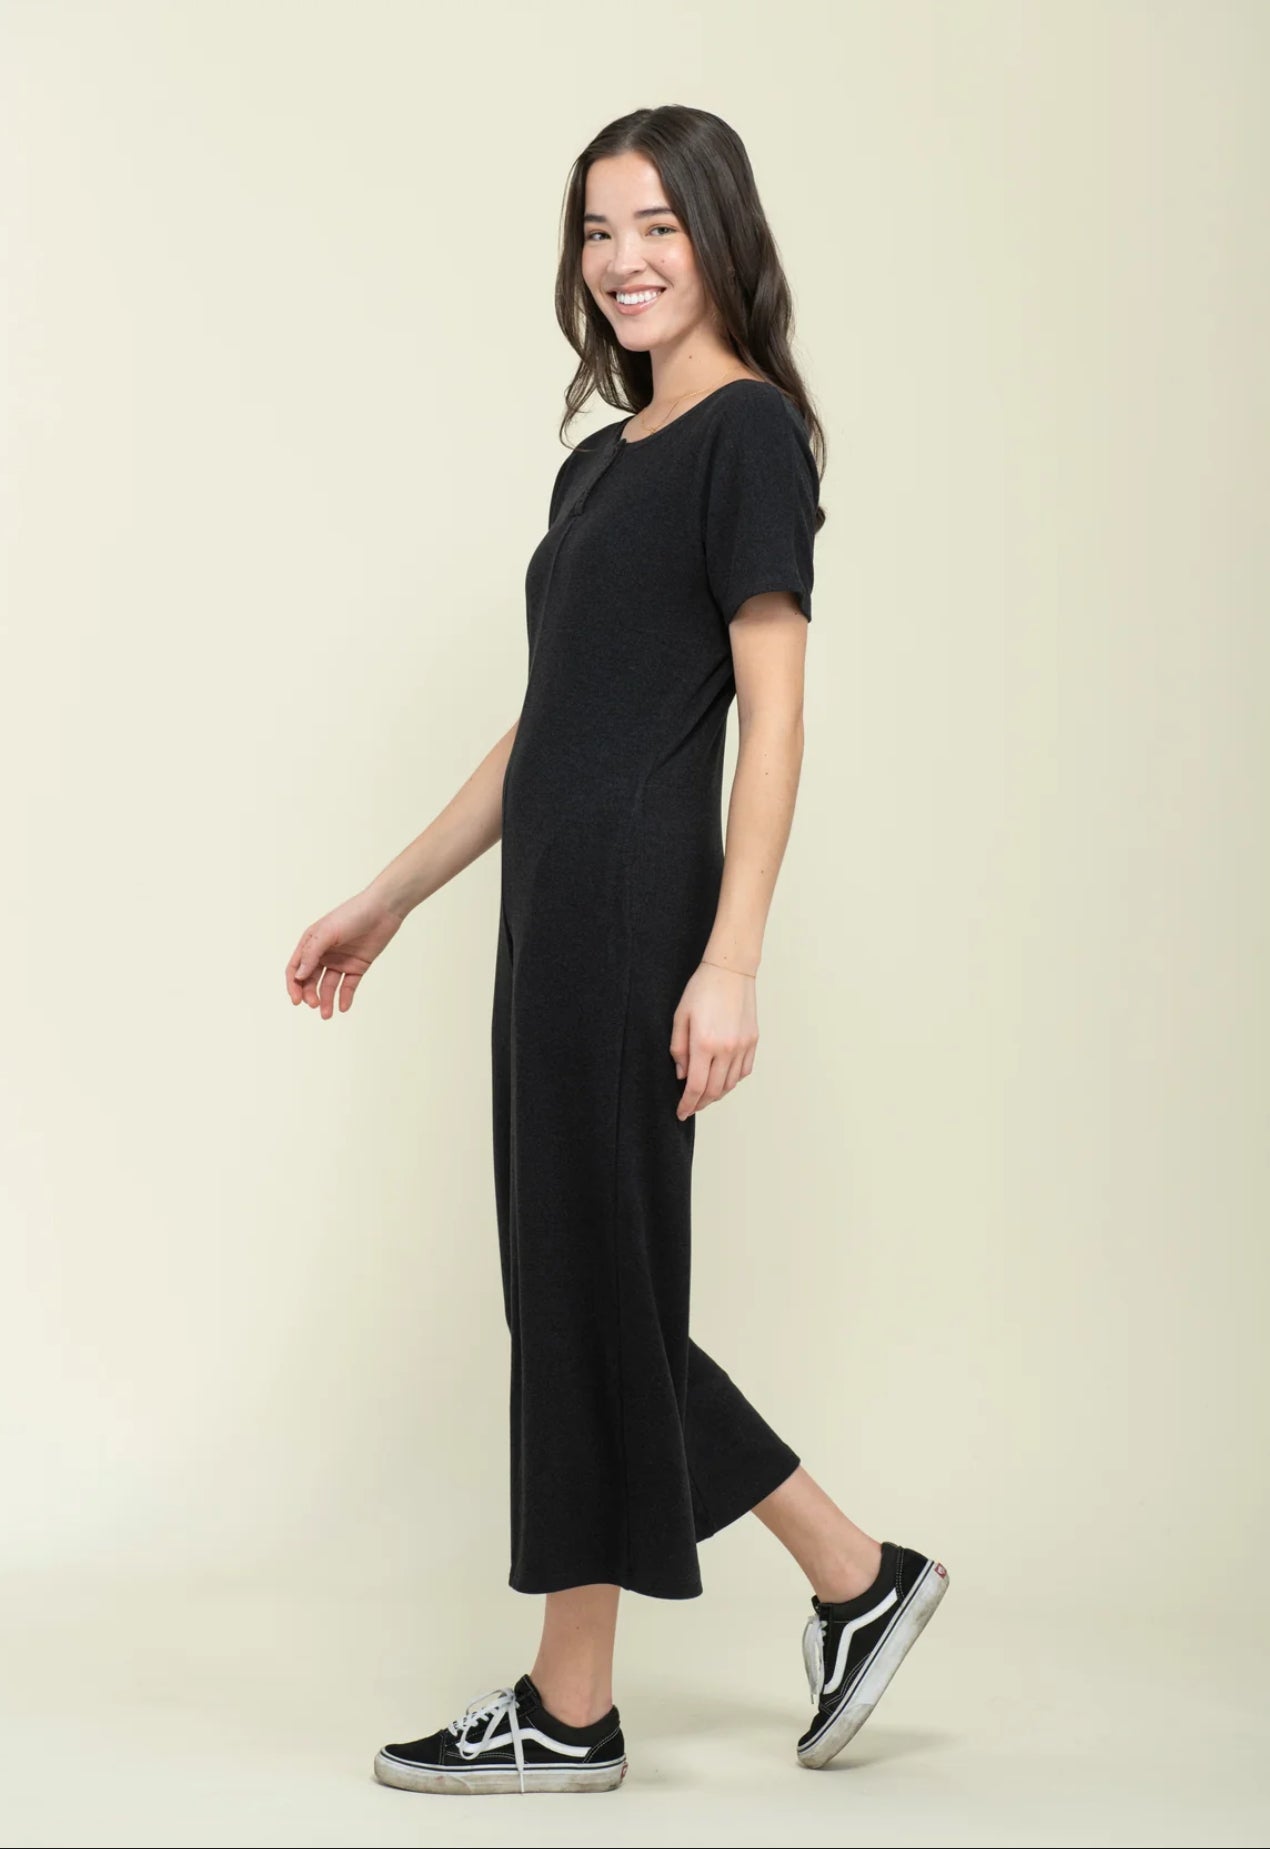 Jonie brushed jersey jumpsuit by Orb - black - Blue Sky Fashions & Lingerie